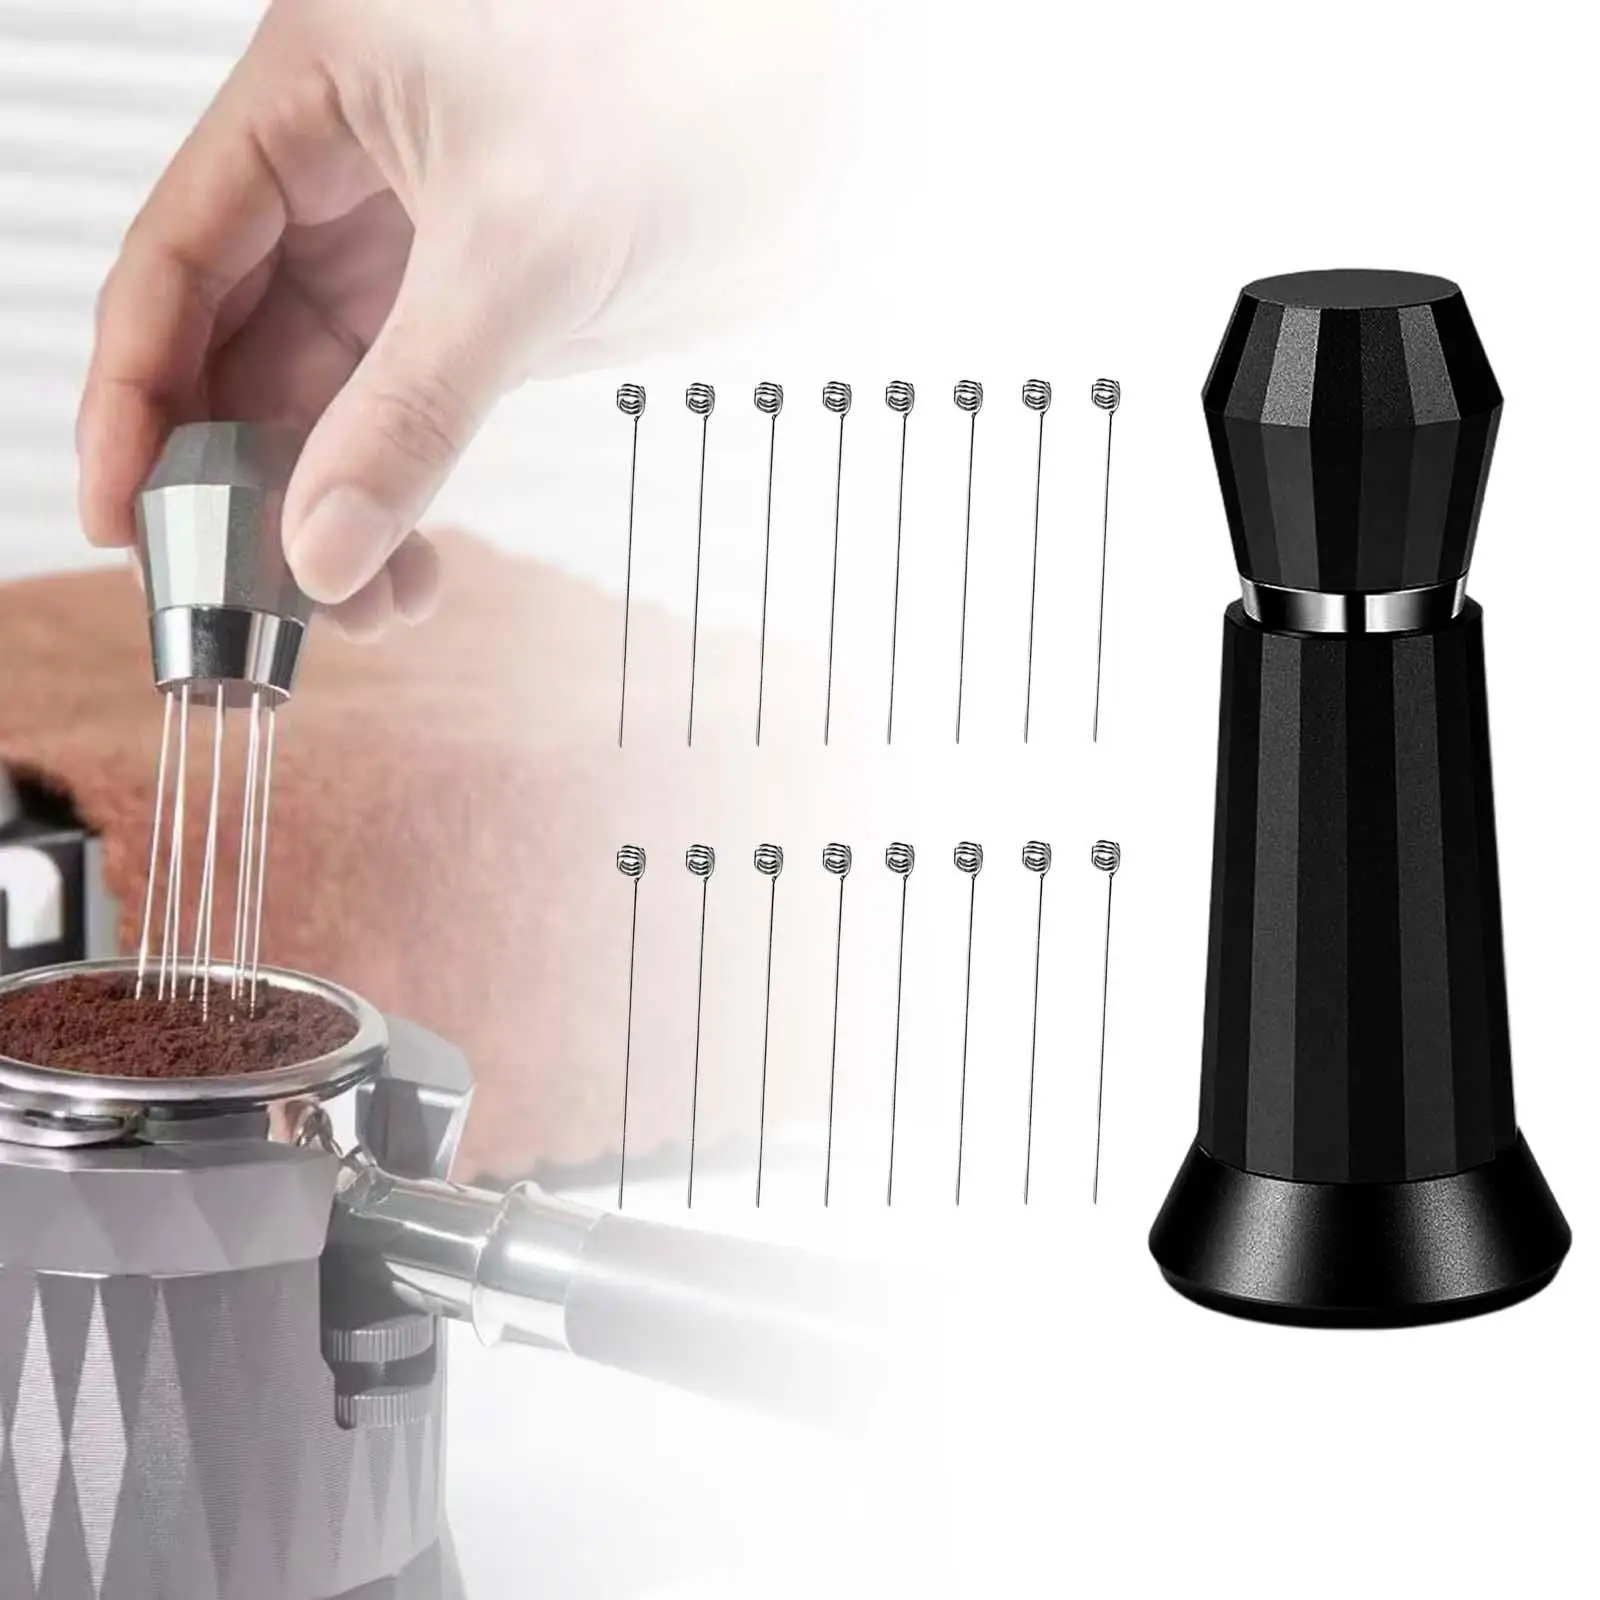 Coffee Stirrer Coffee Grounds Needle Coffee Needle Distributor for Restaurant Kitchen Home Gifts for Coffee Lovers